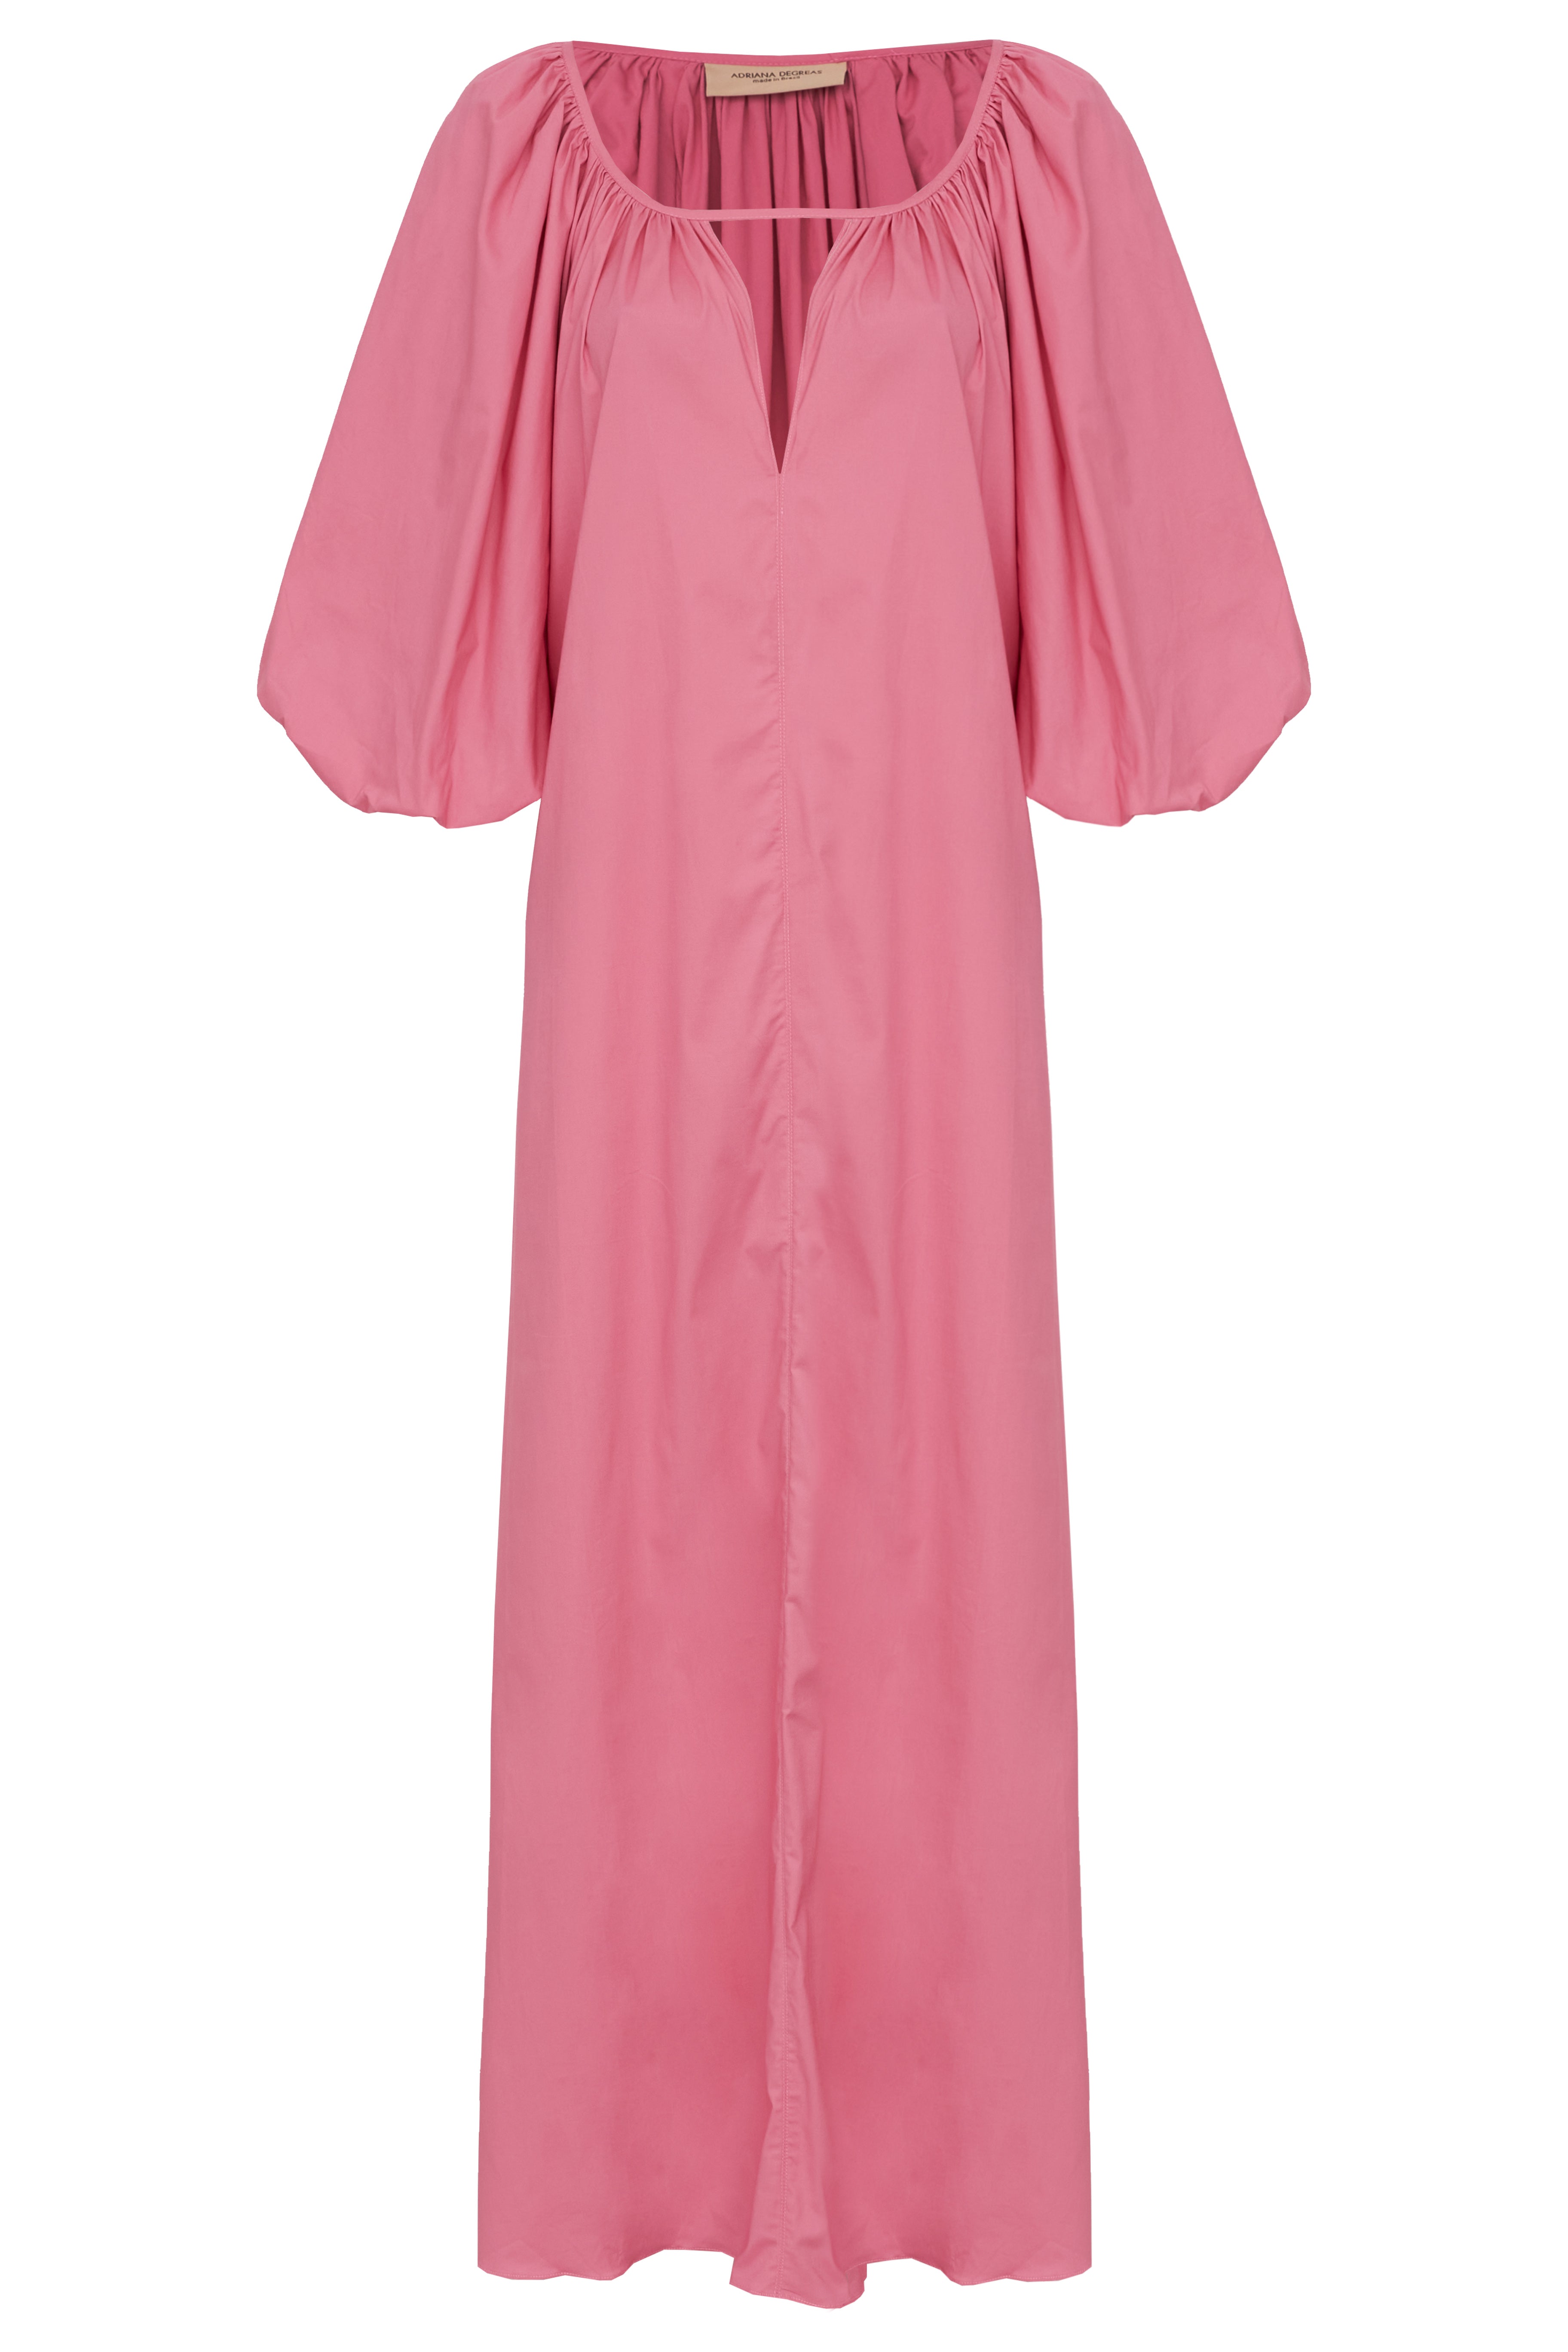 Effortless Chic Pink Puff-Sleeved Long Dress Product